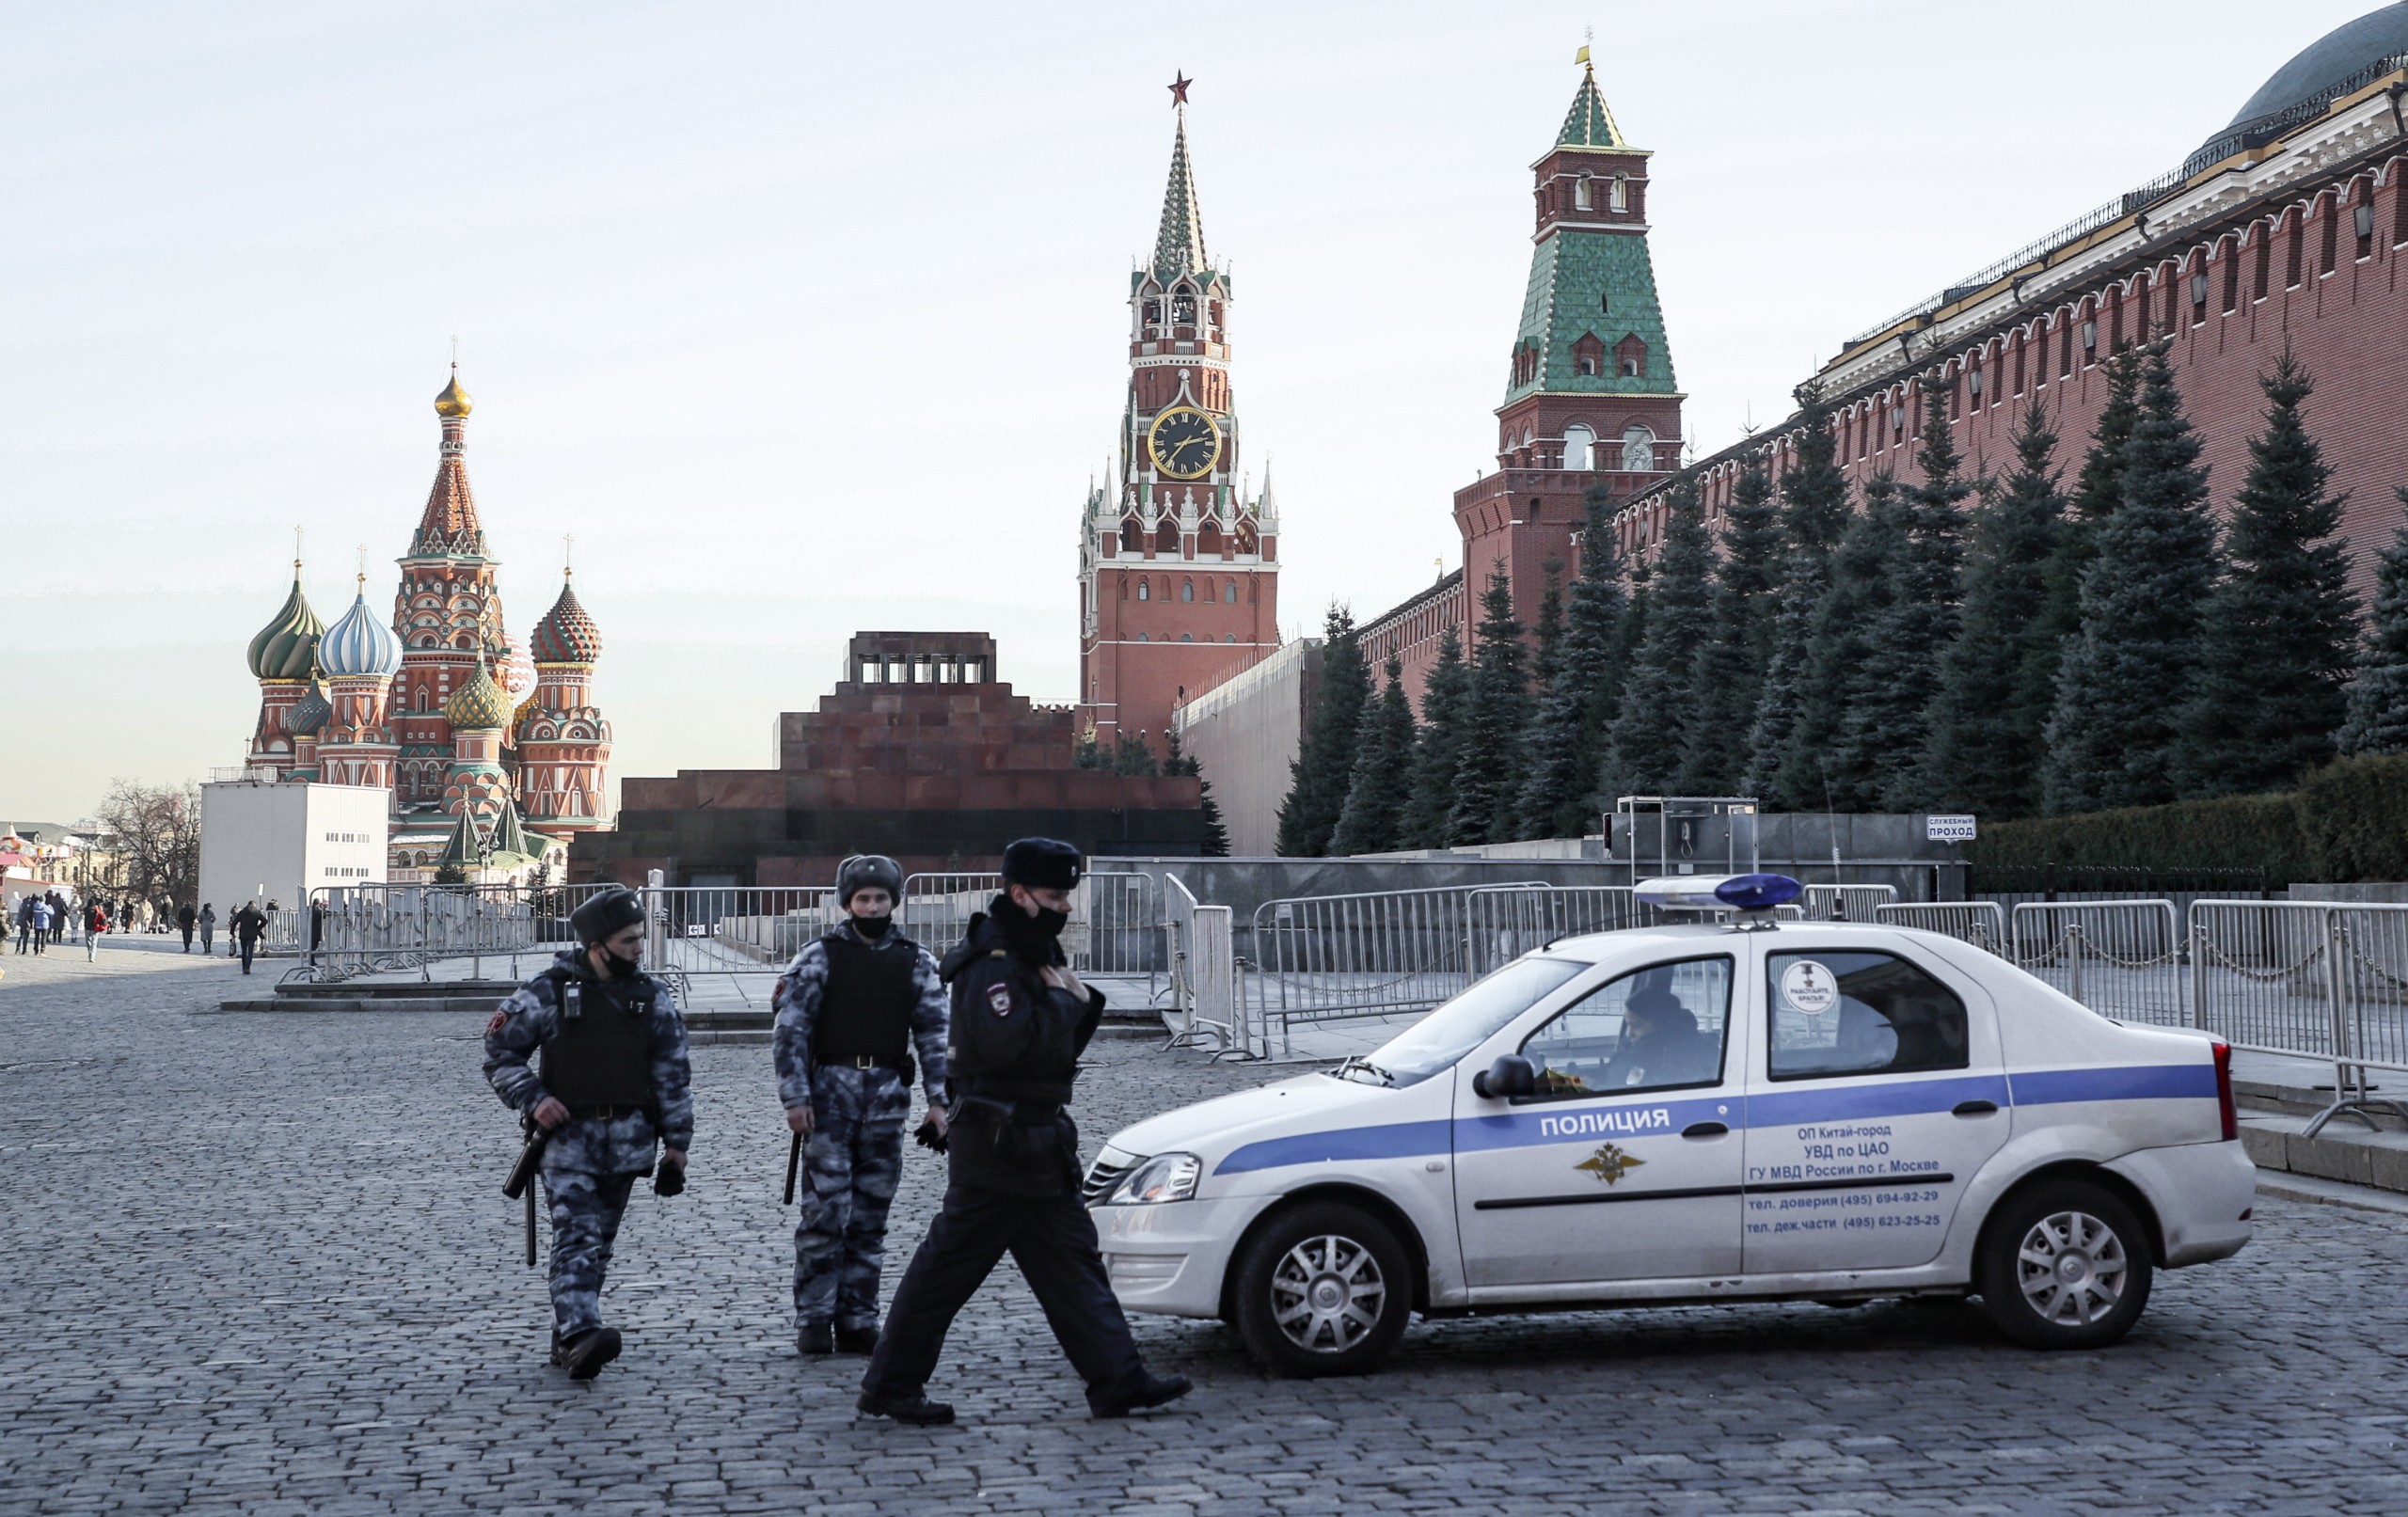 epa09793942 Police on patrol in Red Square in Moscow, Russia, 01 March 2022. Russian troops entered Ukraine on 24 February prompting the country's president to declare martial law and triggering a series of severe economic sanctions imposed by Western countries on Russia. Starting from 28 February, the Central Bank of Russia decided to increase the key rate to 20 percent per annum, in an attempt to ensure financial and price stability.  EPA/YURI KOCHETKOV